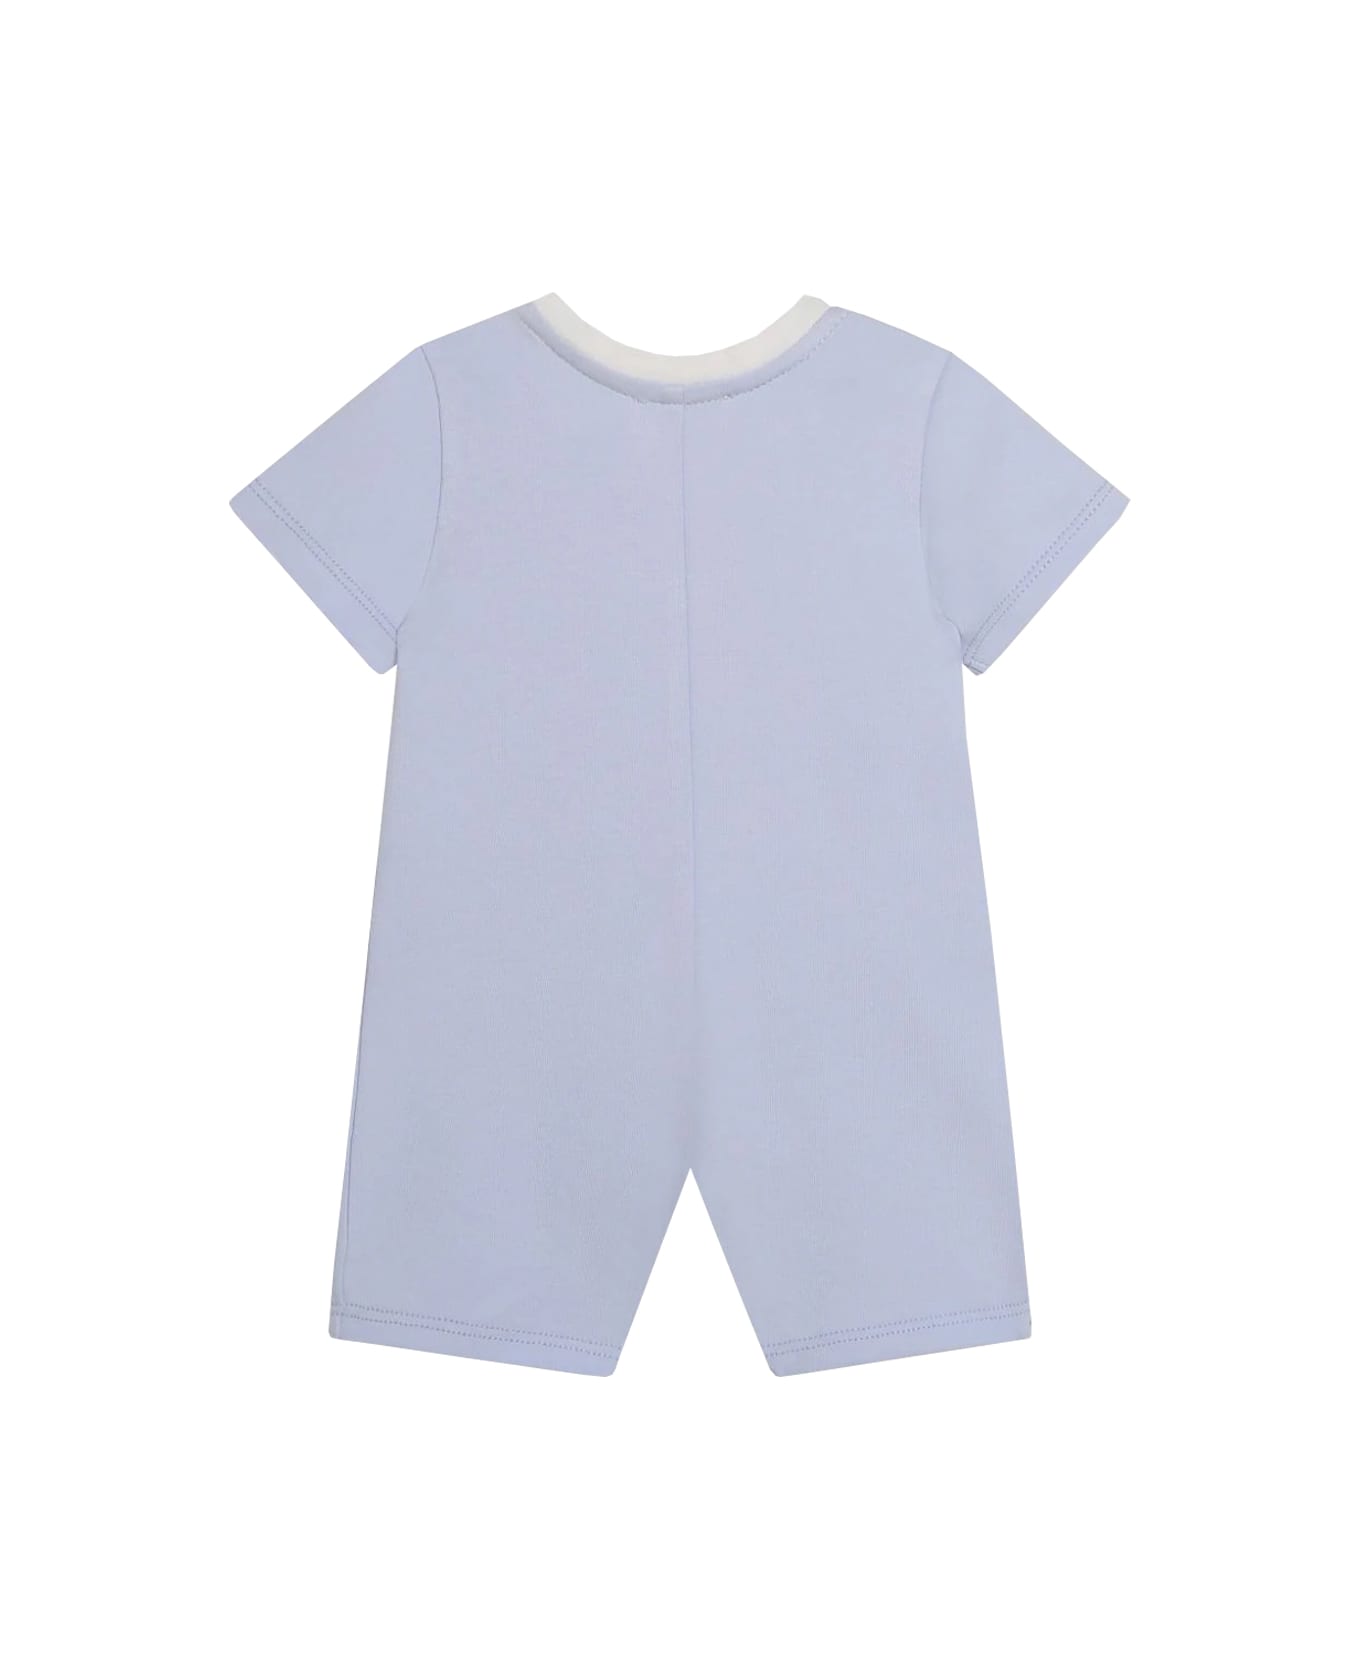 Givenchy Romper With Print - Light blue ボディスーツ＆セットアップ